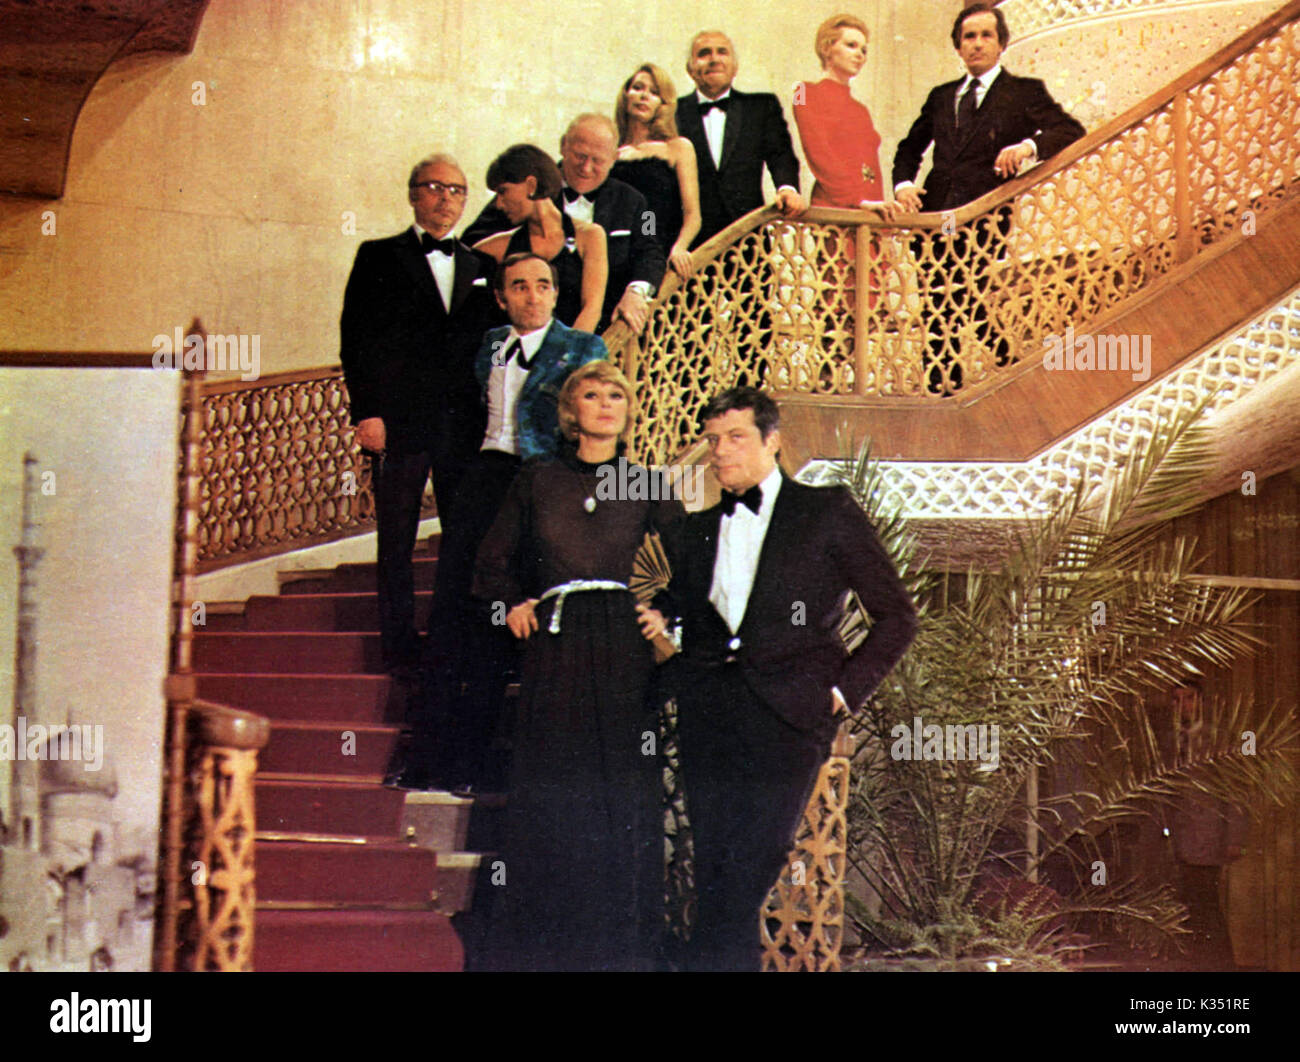 AND THEN THERE WERE NONE ALBERTO DE MENDOZA, MARIA REHM, ADOLFO CELI, , GERT FROBE, STEPHANE AUDRAN, HERBERT LOM, CHARLES AZNAVOUR, ELKE SOMMER, OLIVER REED     Date: 1974 Stock Photo